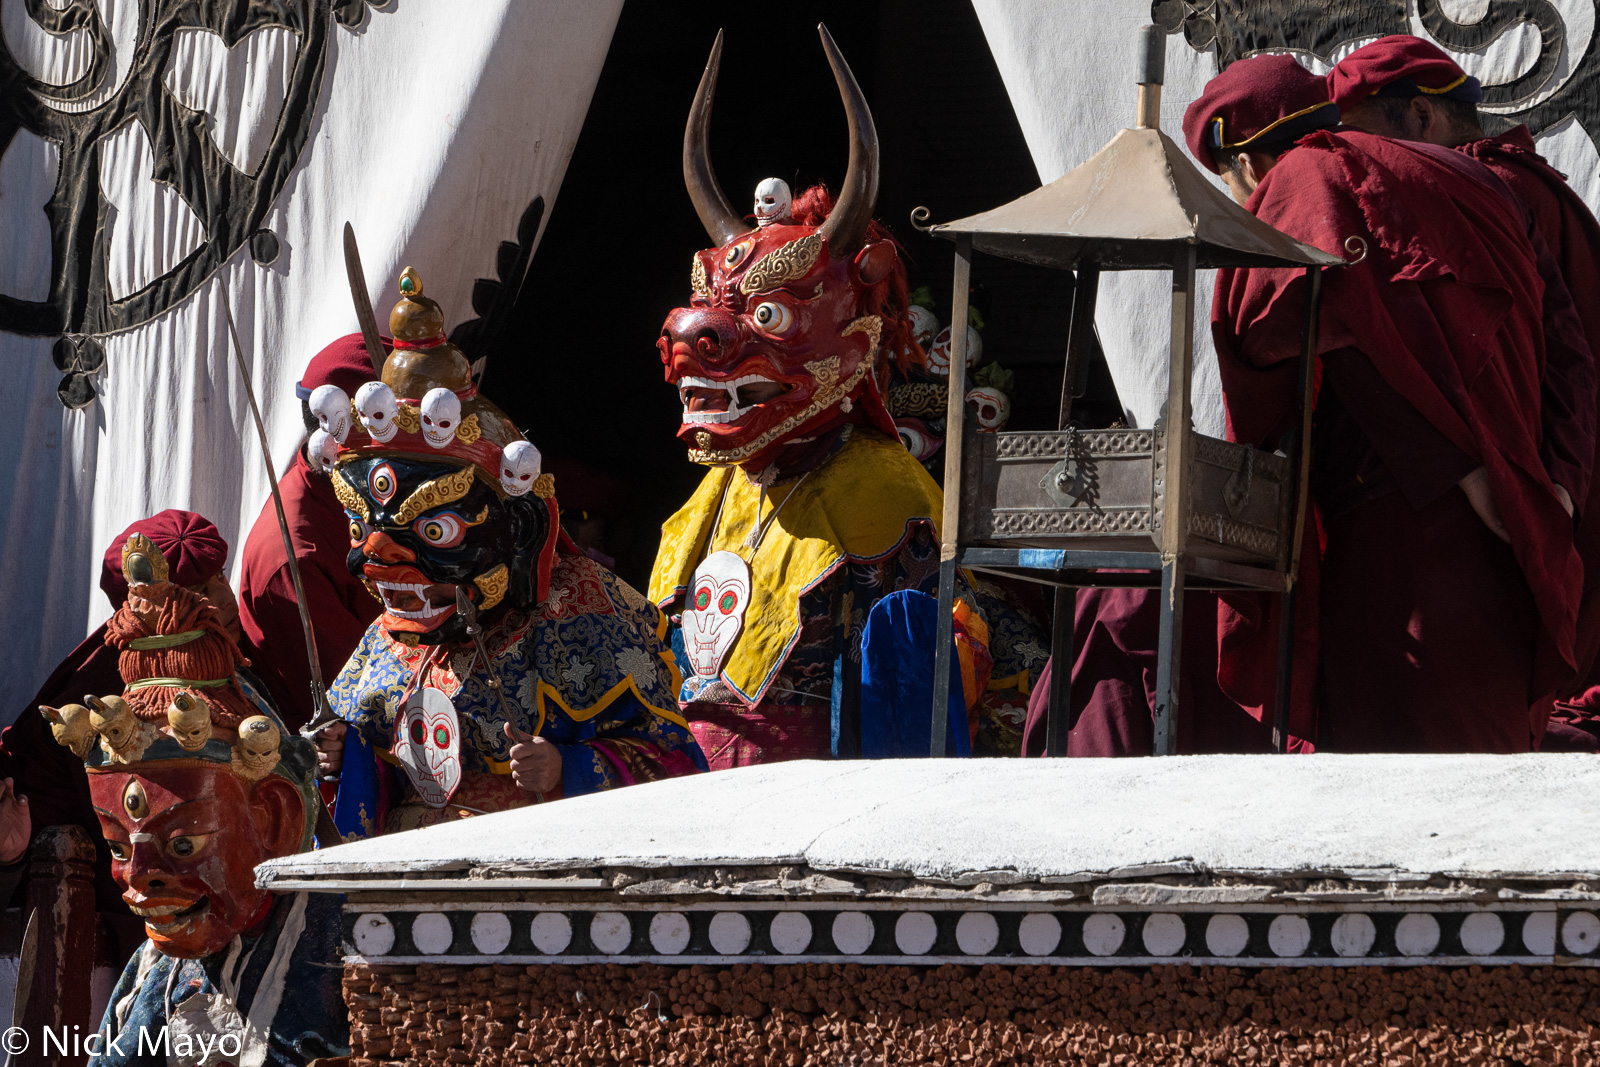 Masked monks descending to the courtyard of Hemis monastery to perform in the winter cham dances.